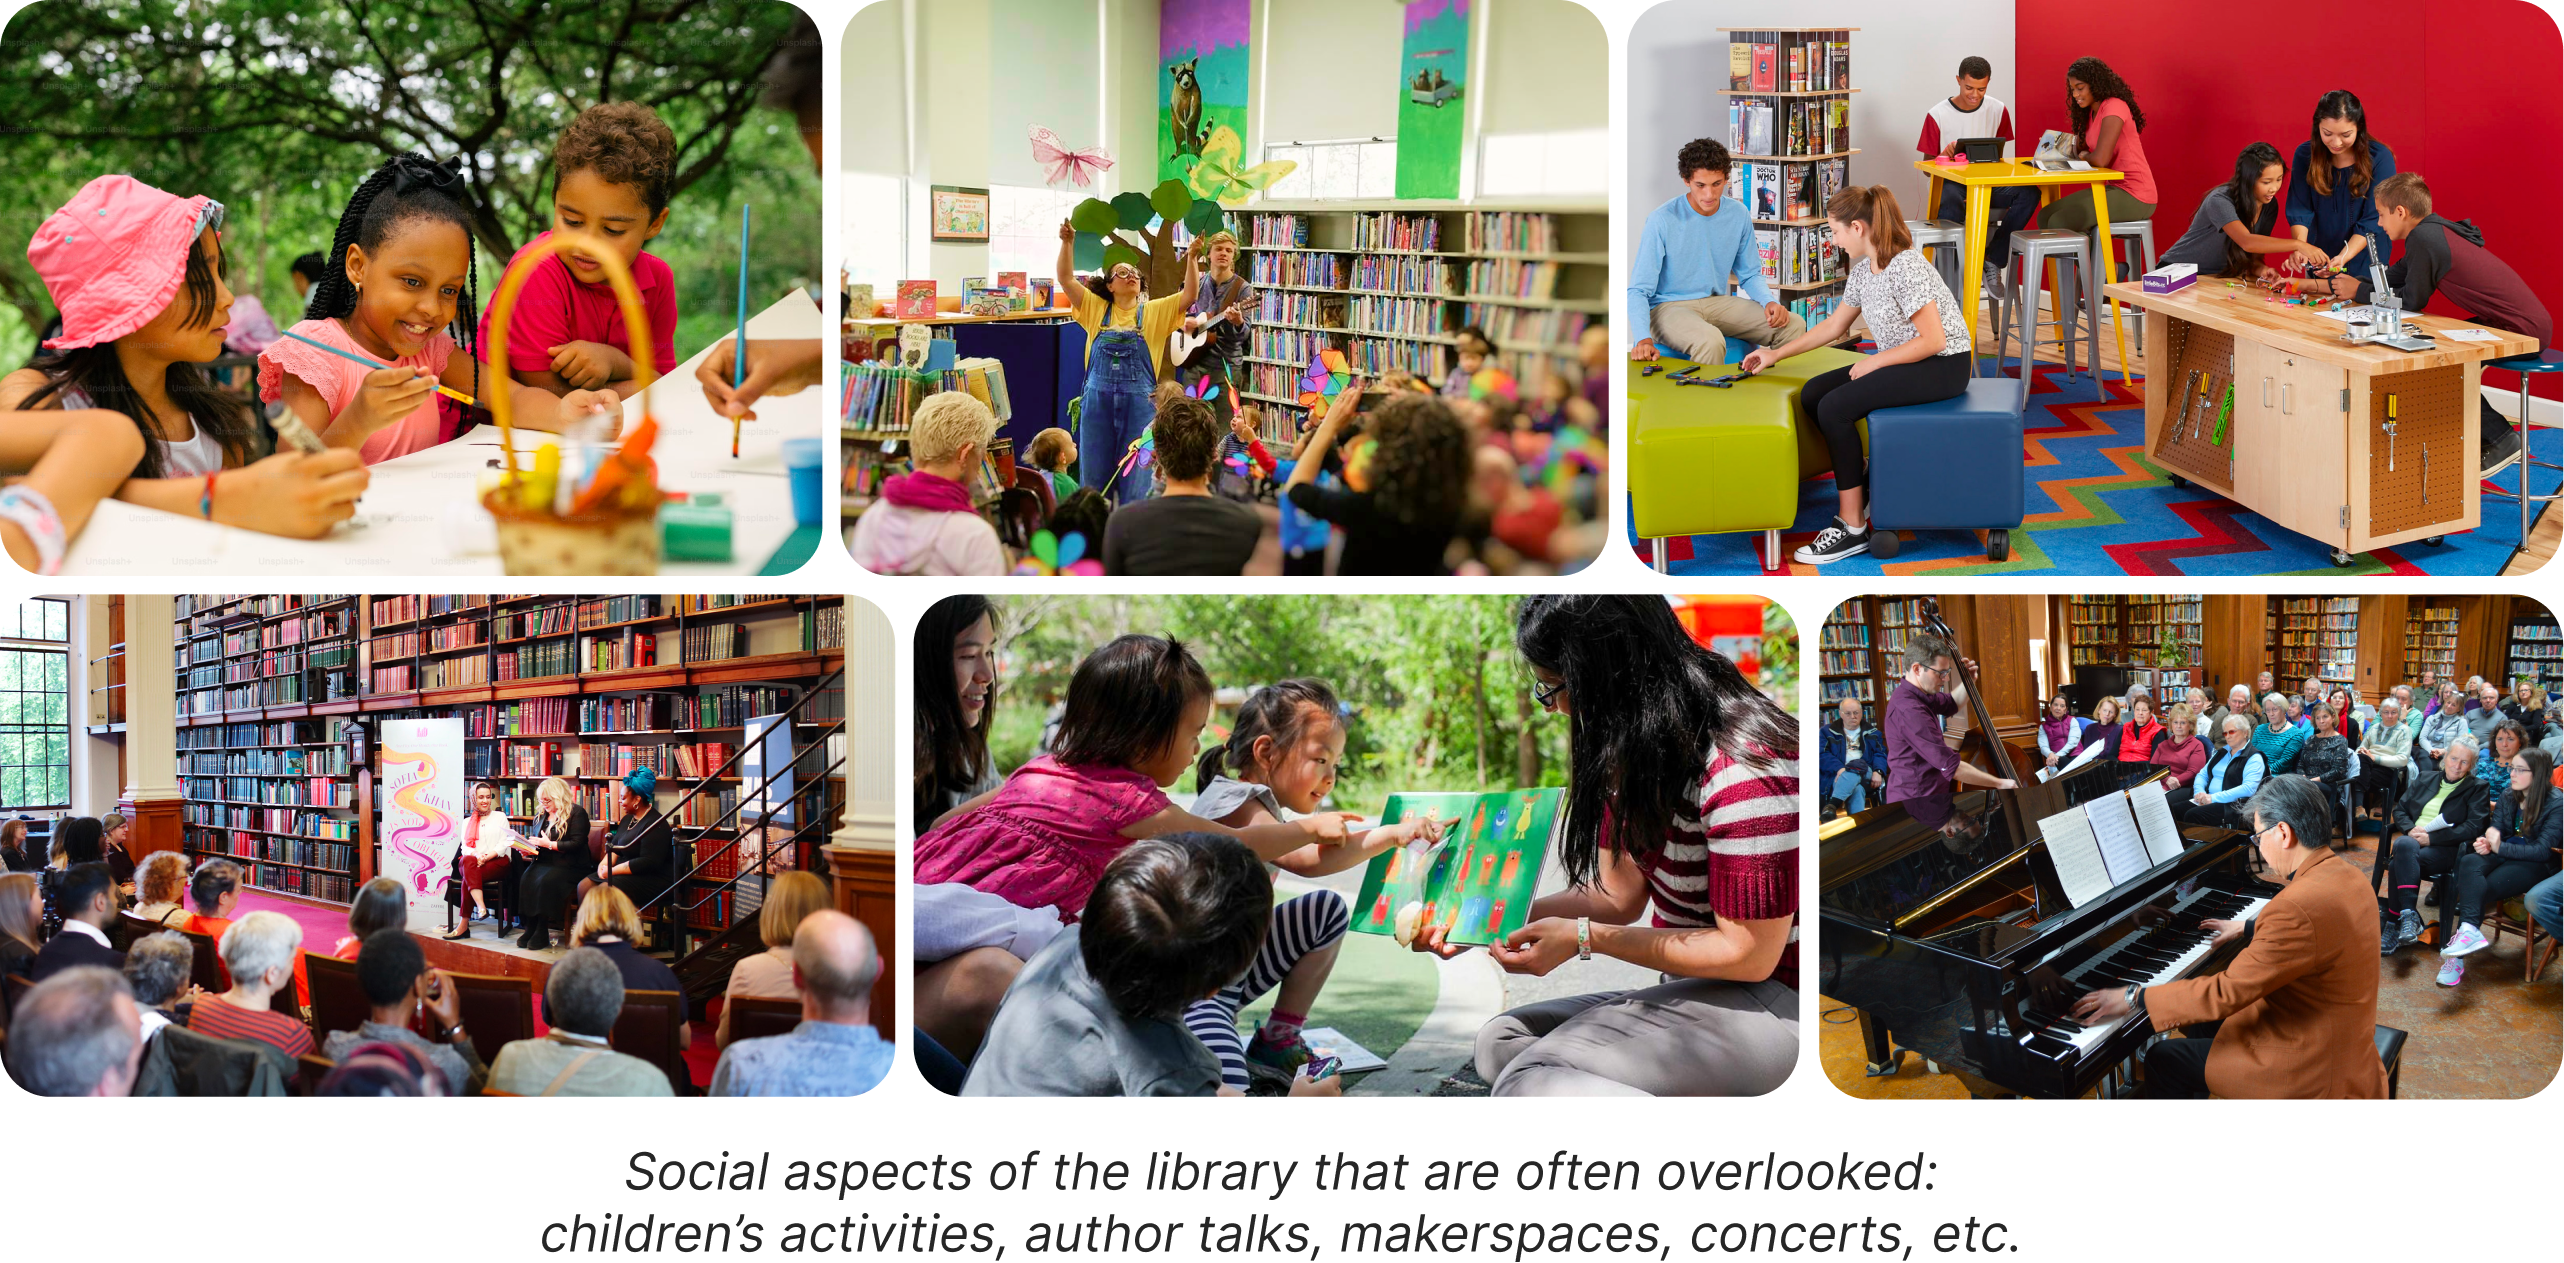 Social aspects of the library that are often overlooked: children’s activities, author talks, makerspaces, concerts, etc.